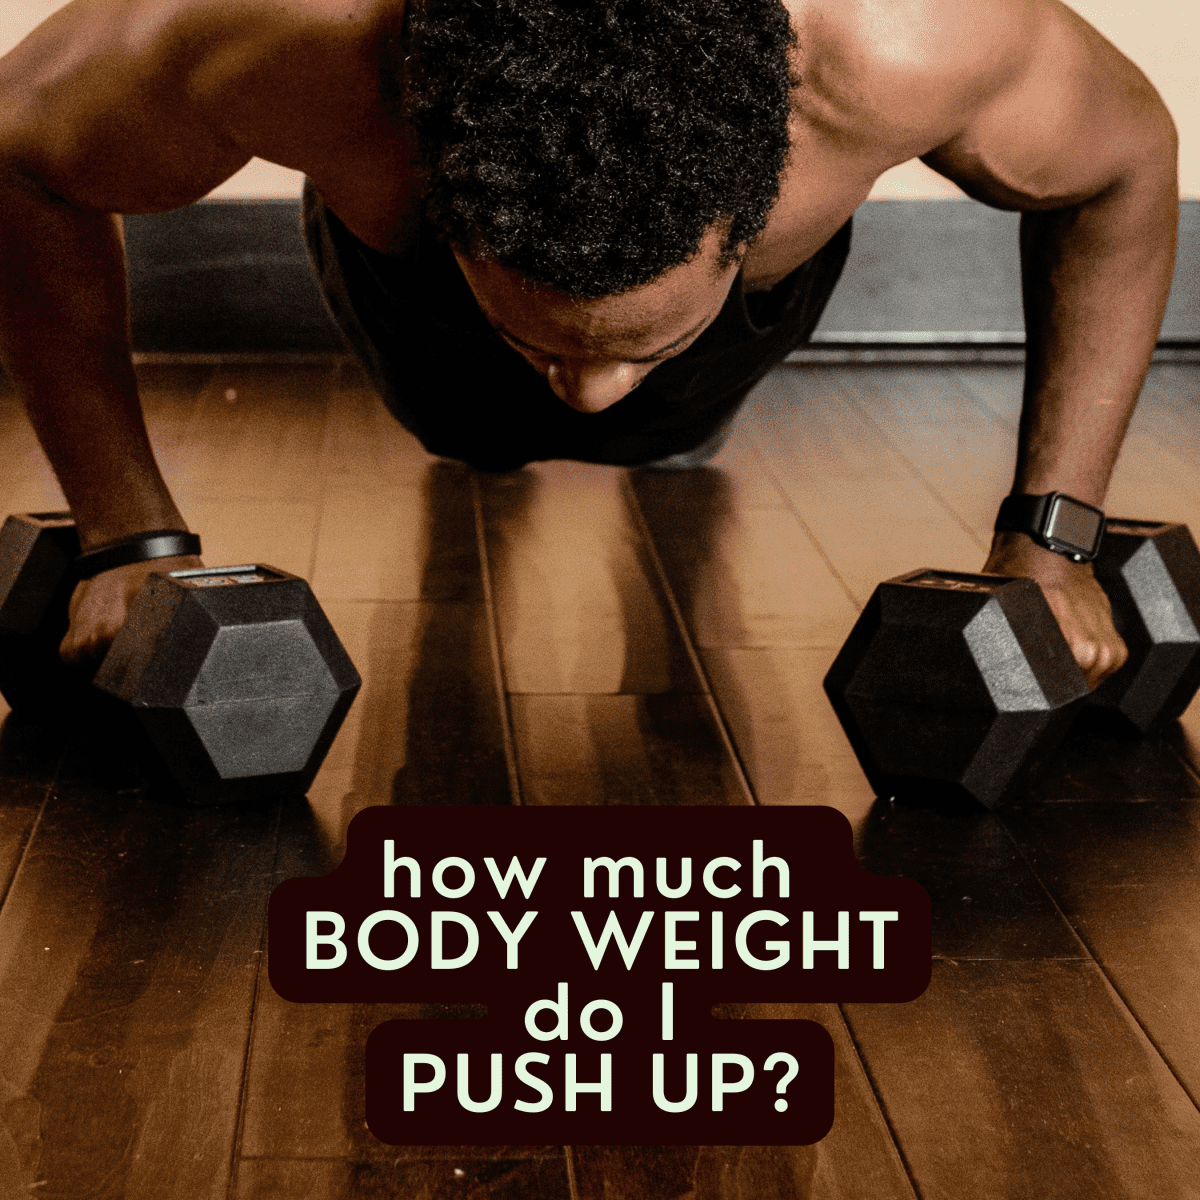 What Do Push-Ups Do to Your Body?